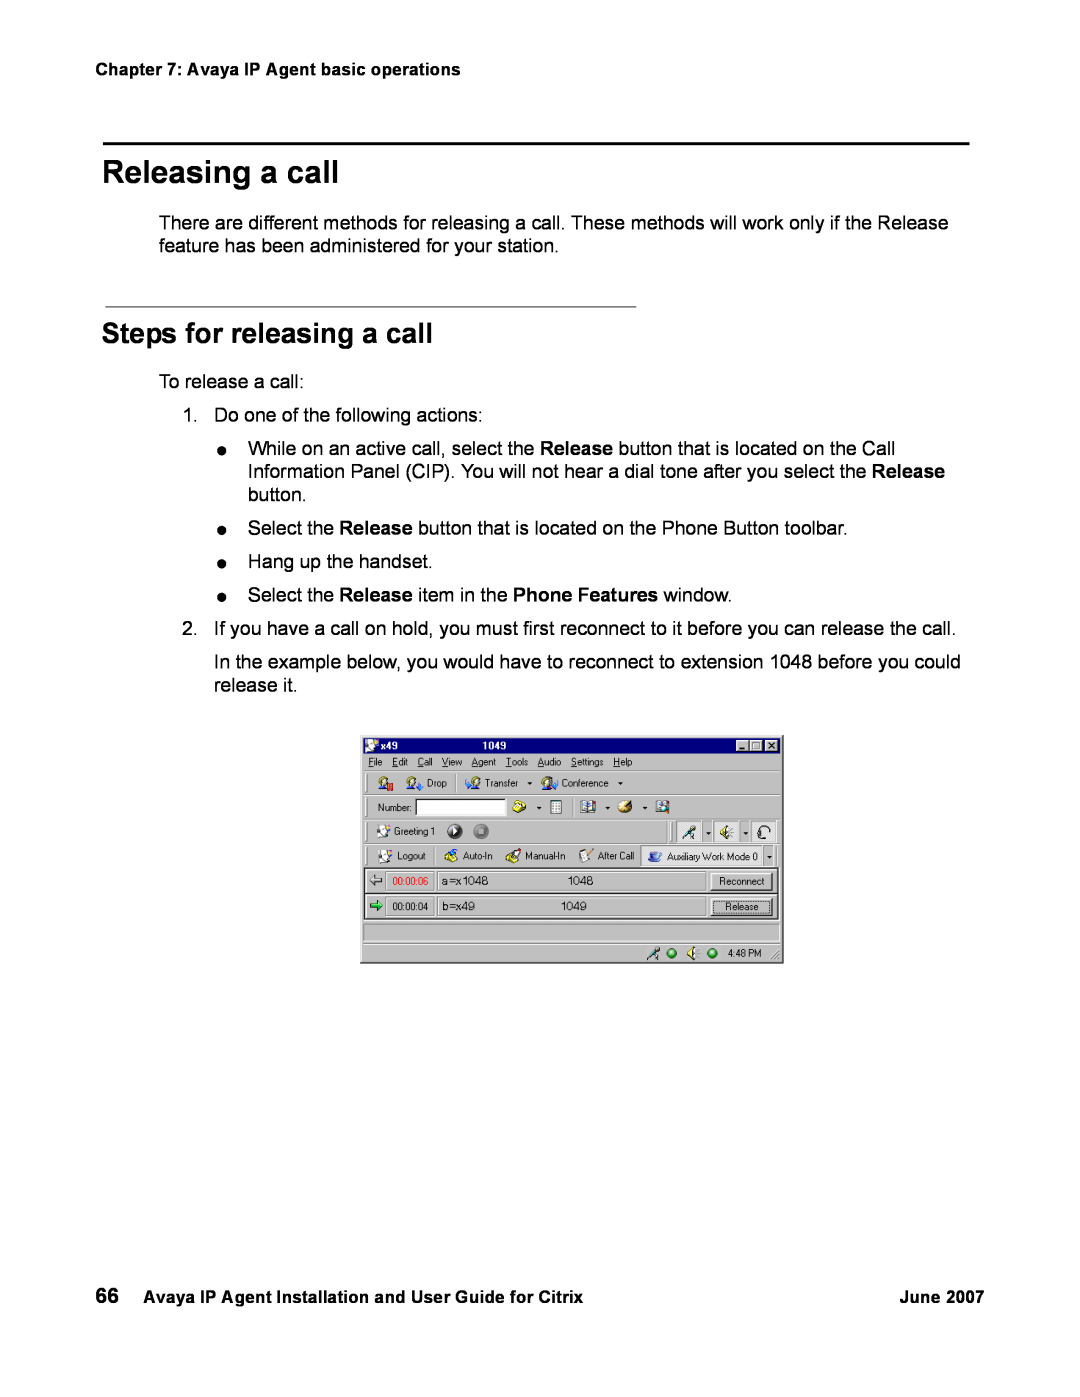 Avaya 7 manual Releasing a call, Steps for releasing a call 